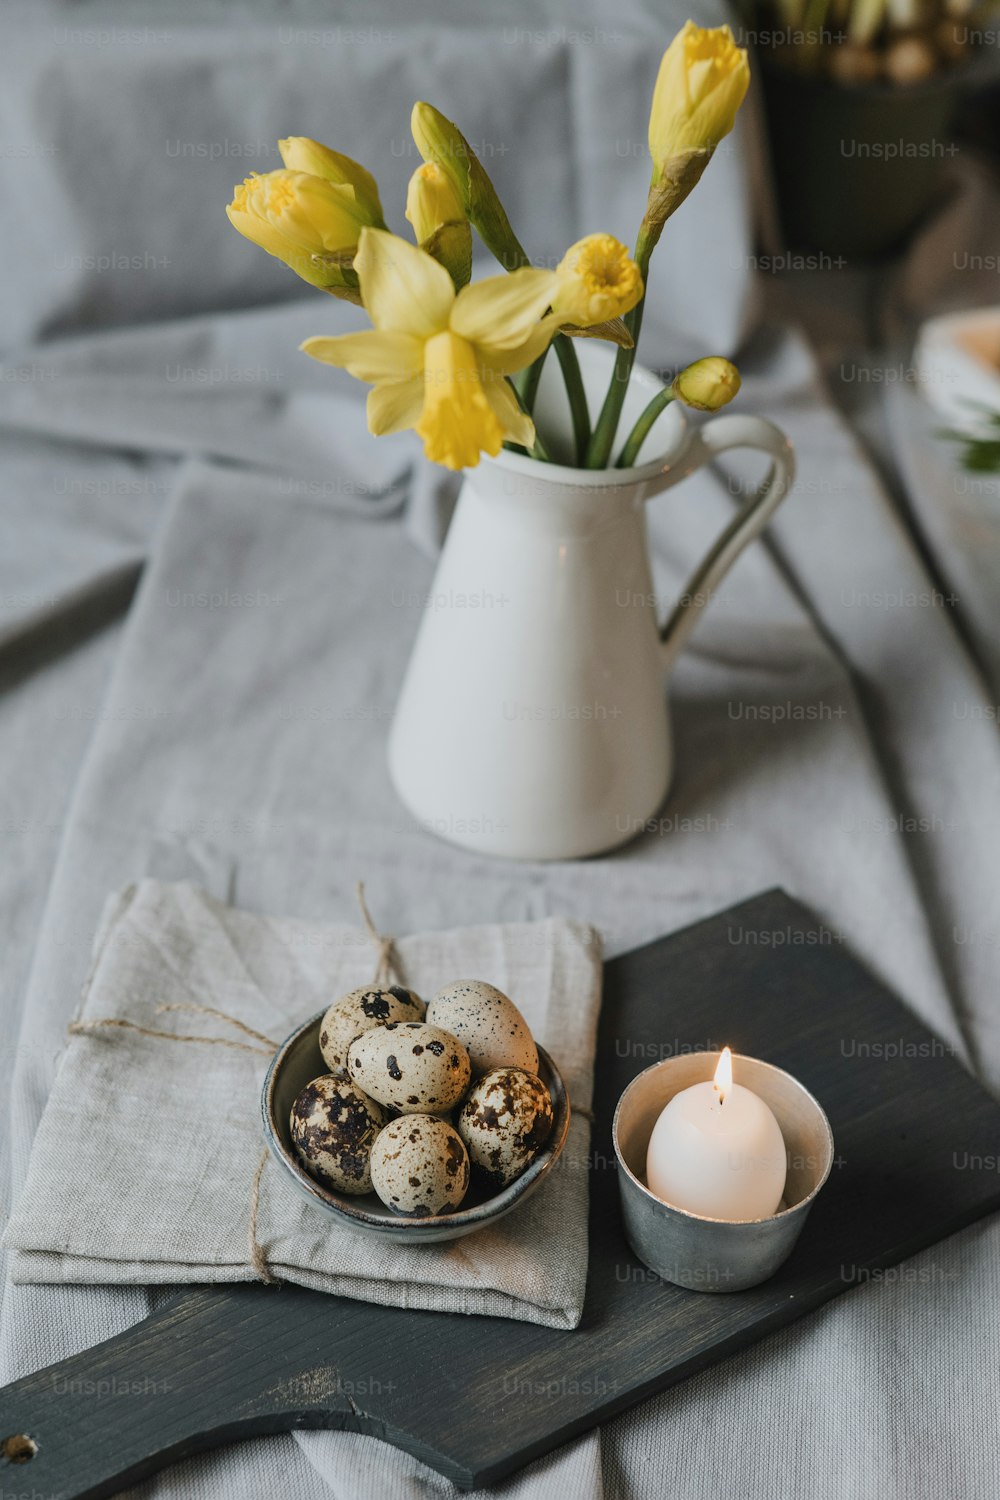 a plate of quails and a cup of flowers on a table